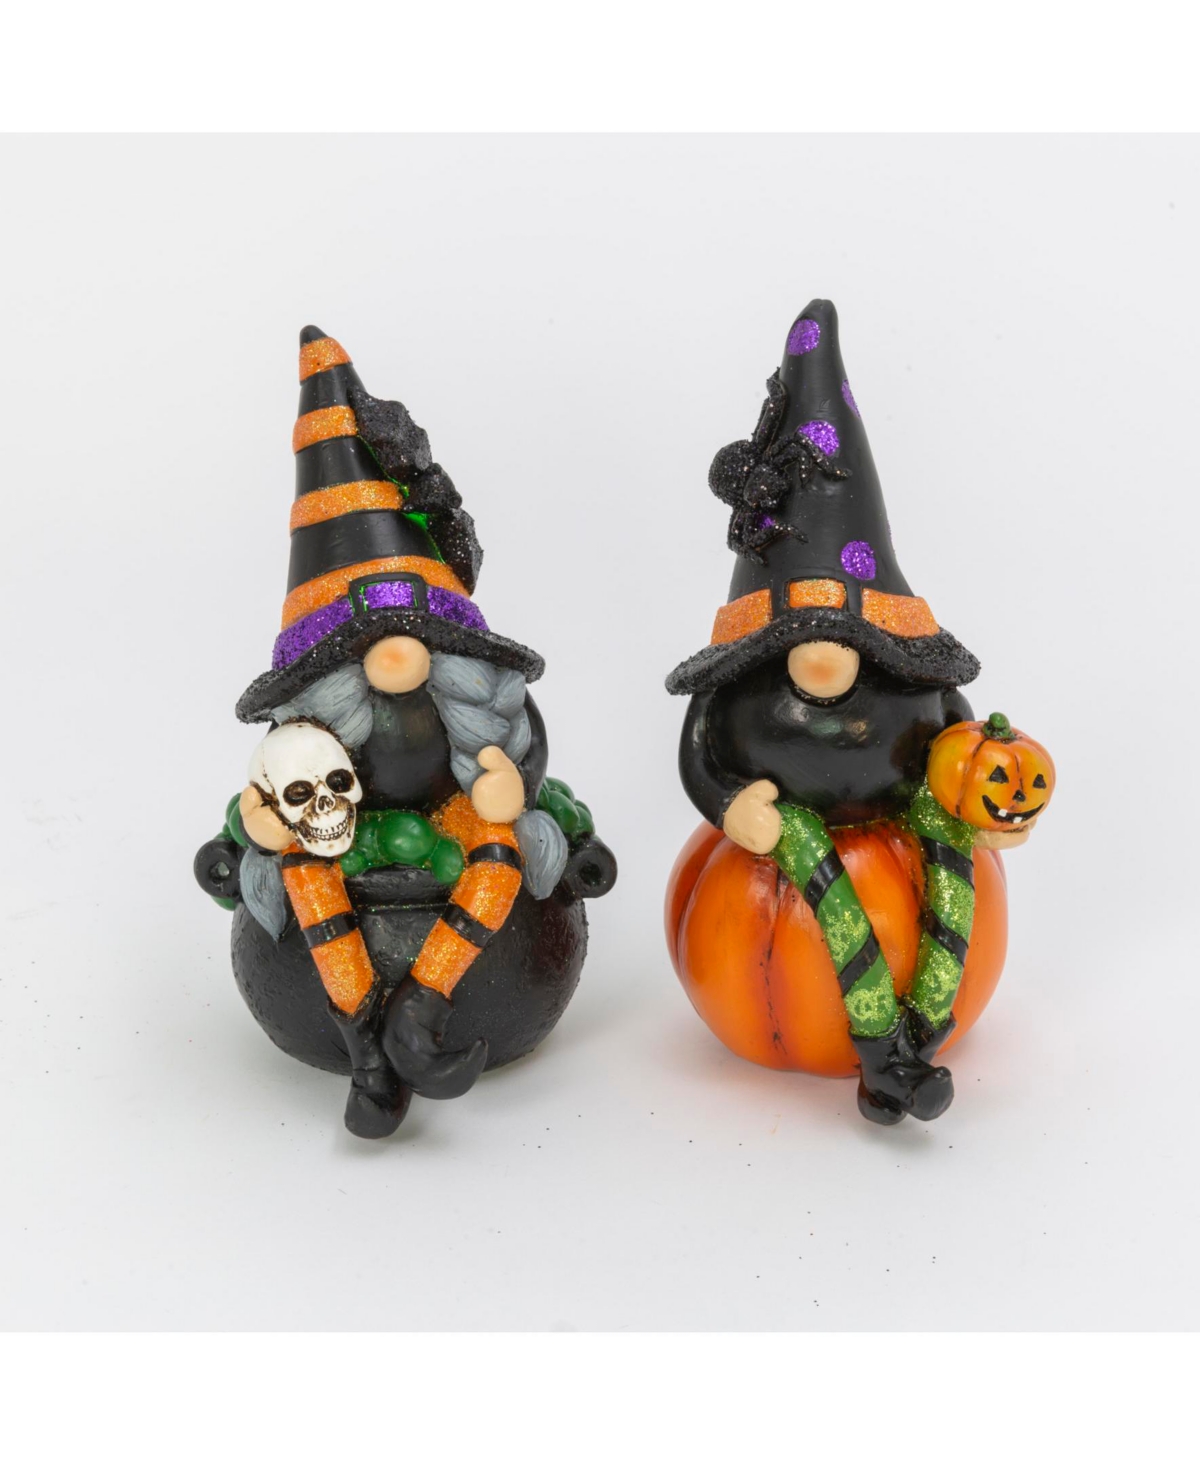 Set of 2 Whimsical Lighted Spooky Halloween Gnomes Decor - Multicolor